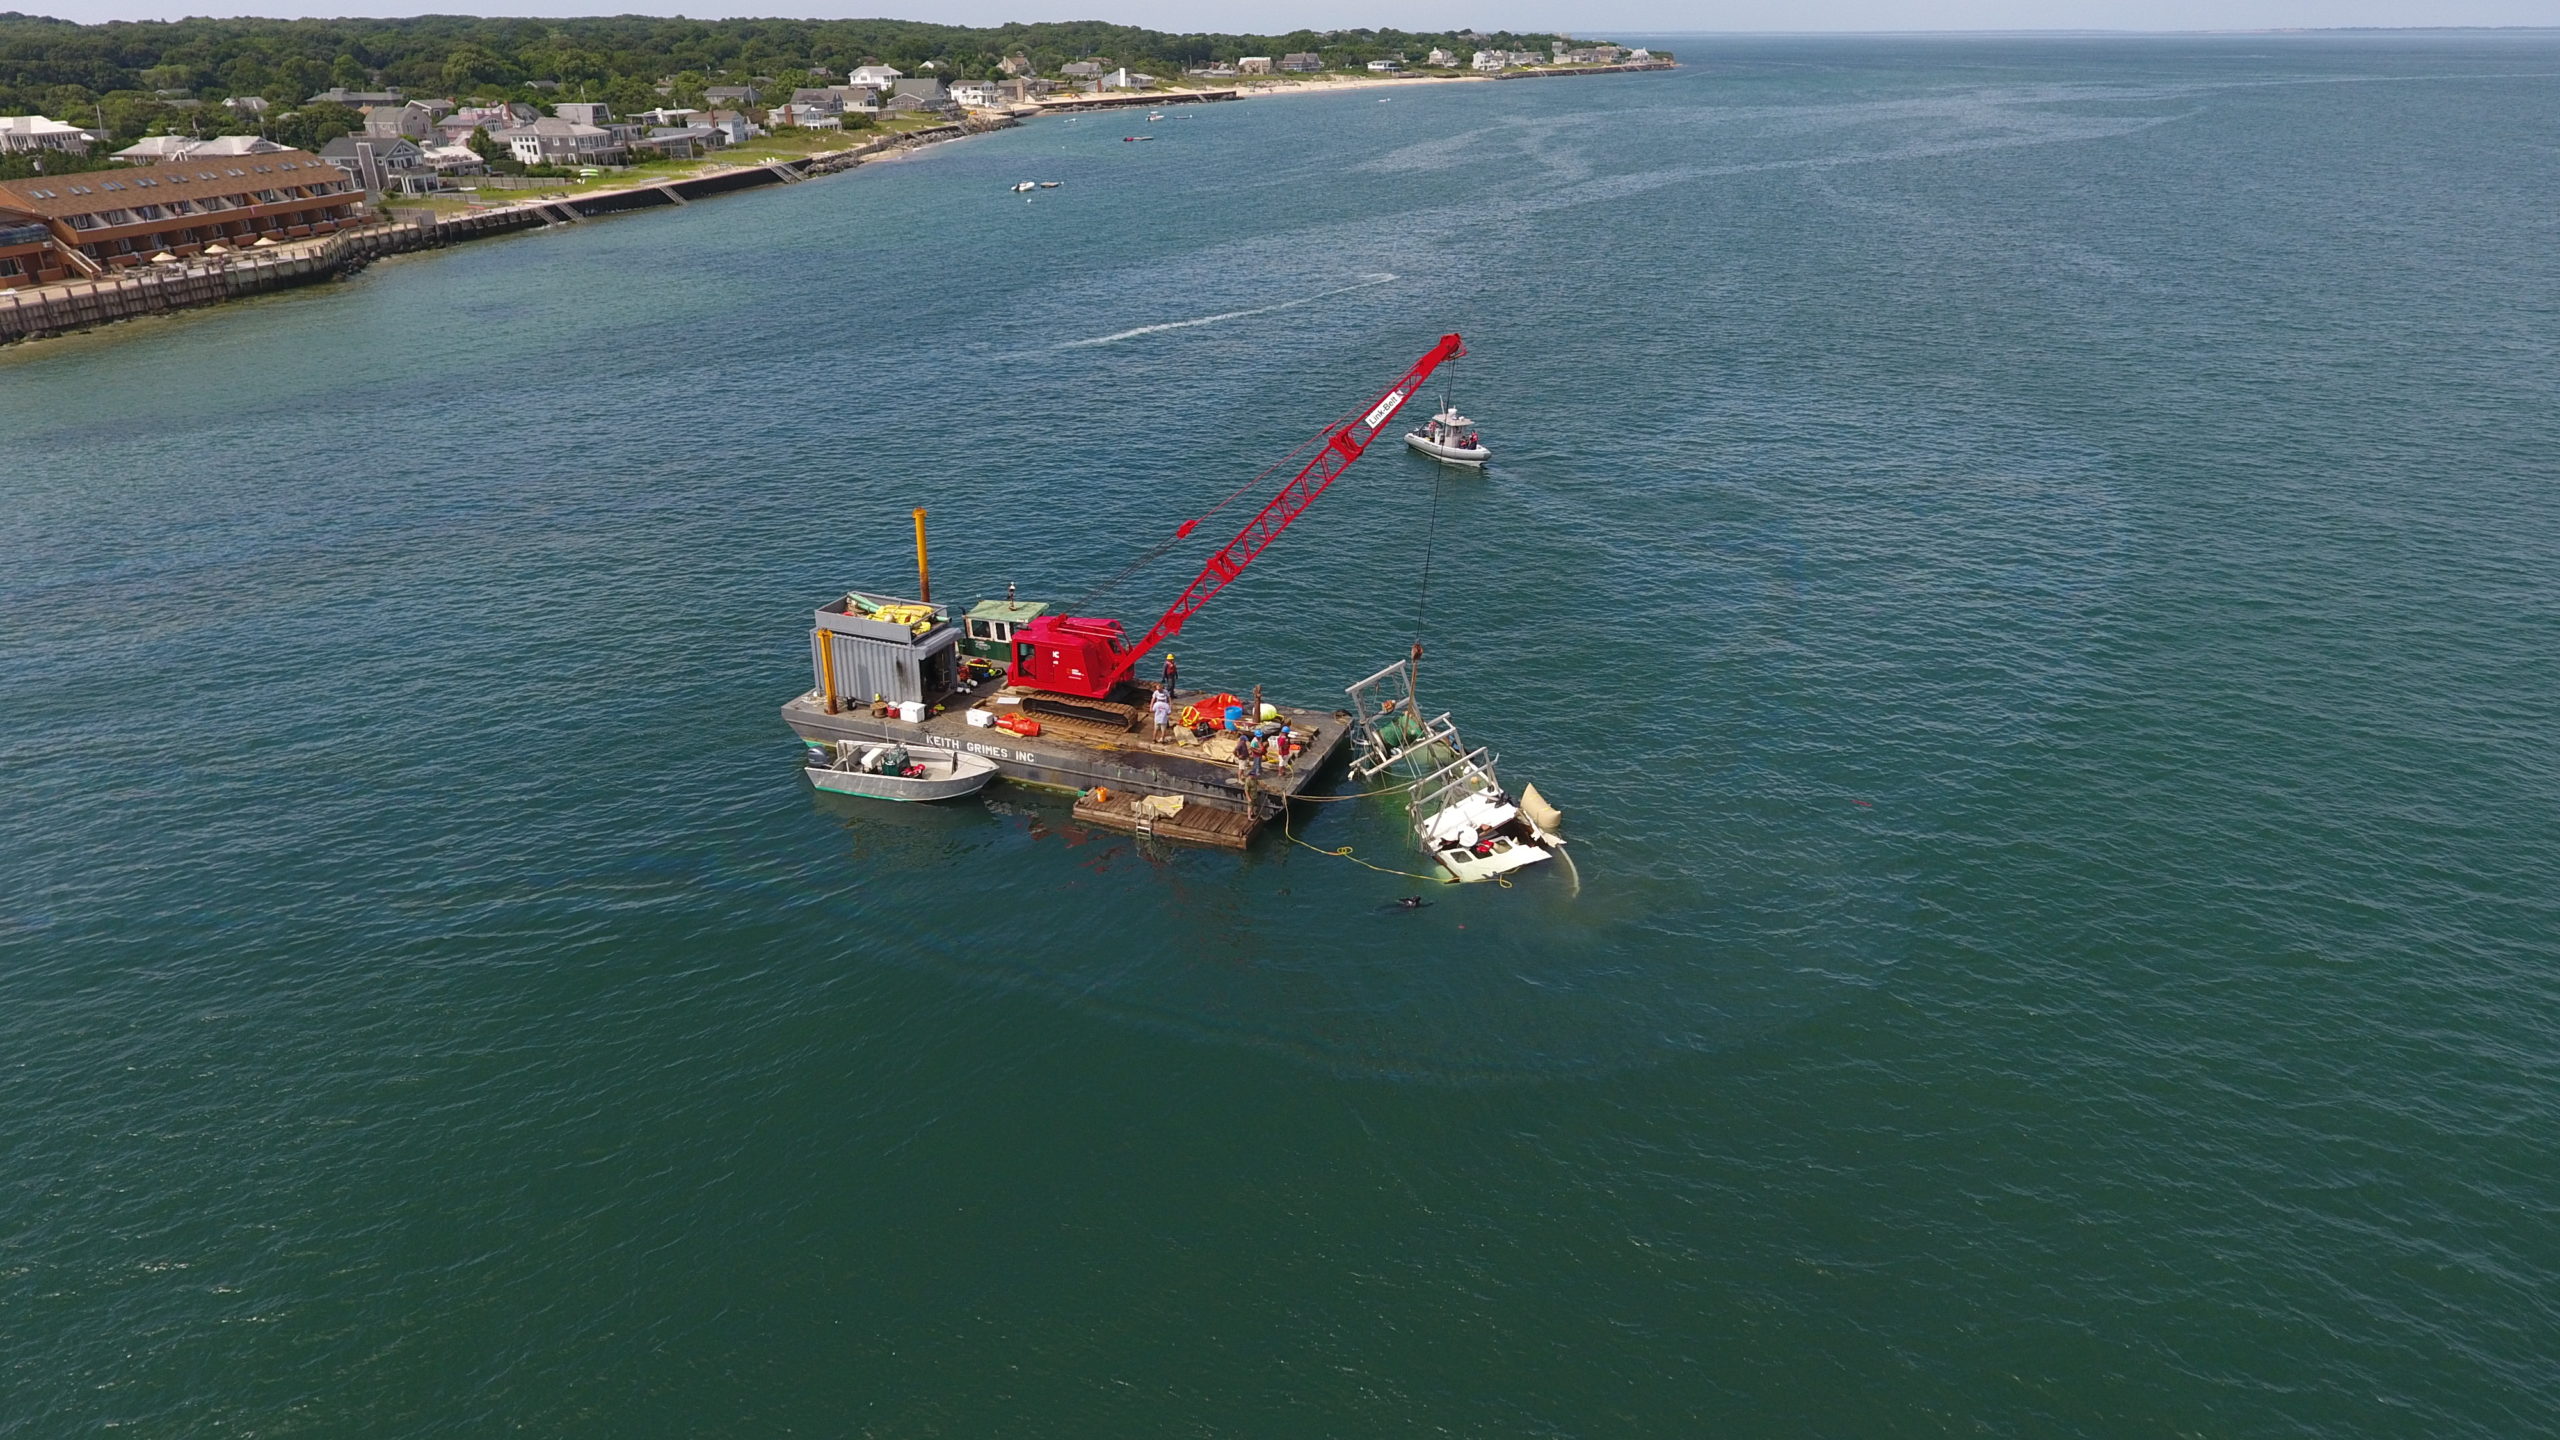 The Petrel was lifted off the bottom of Block Island Sound on Wednesday and Thursday by salvage crews and brought back into Montauk Harbor. 